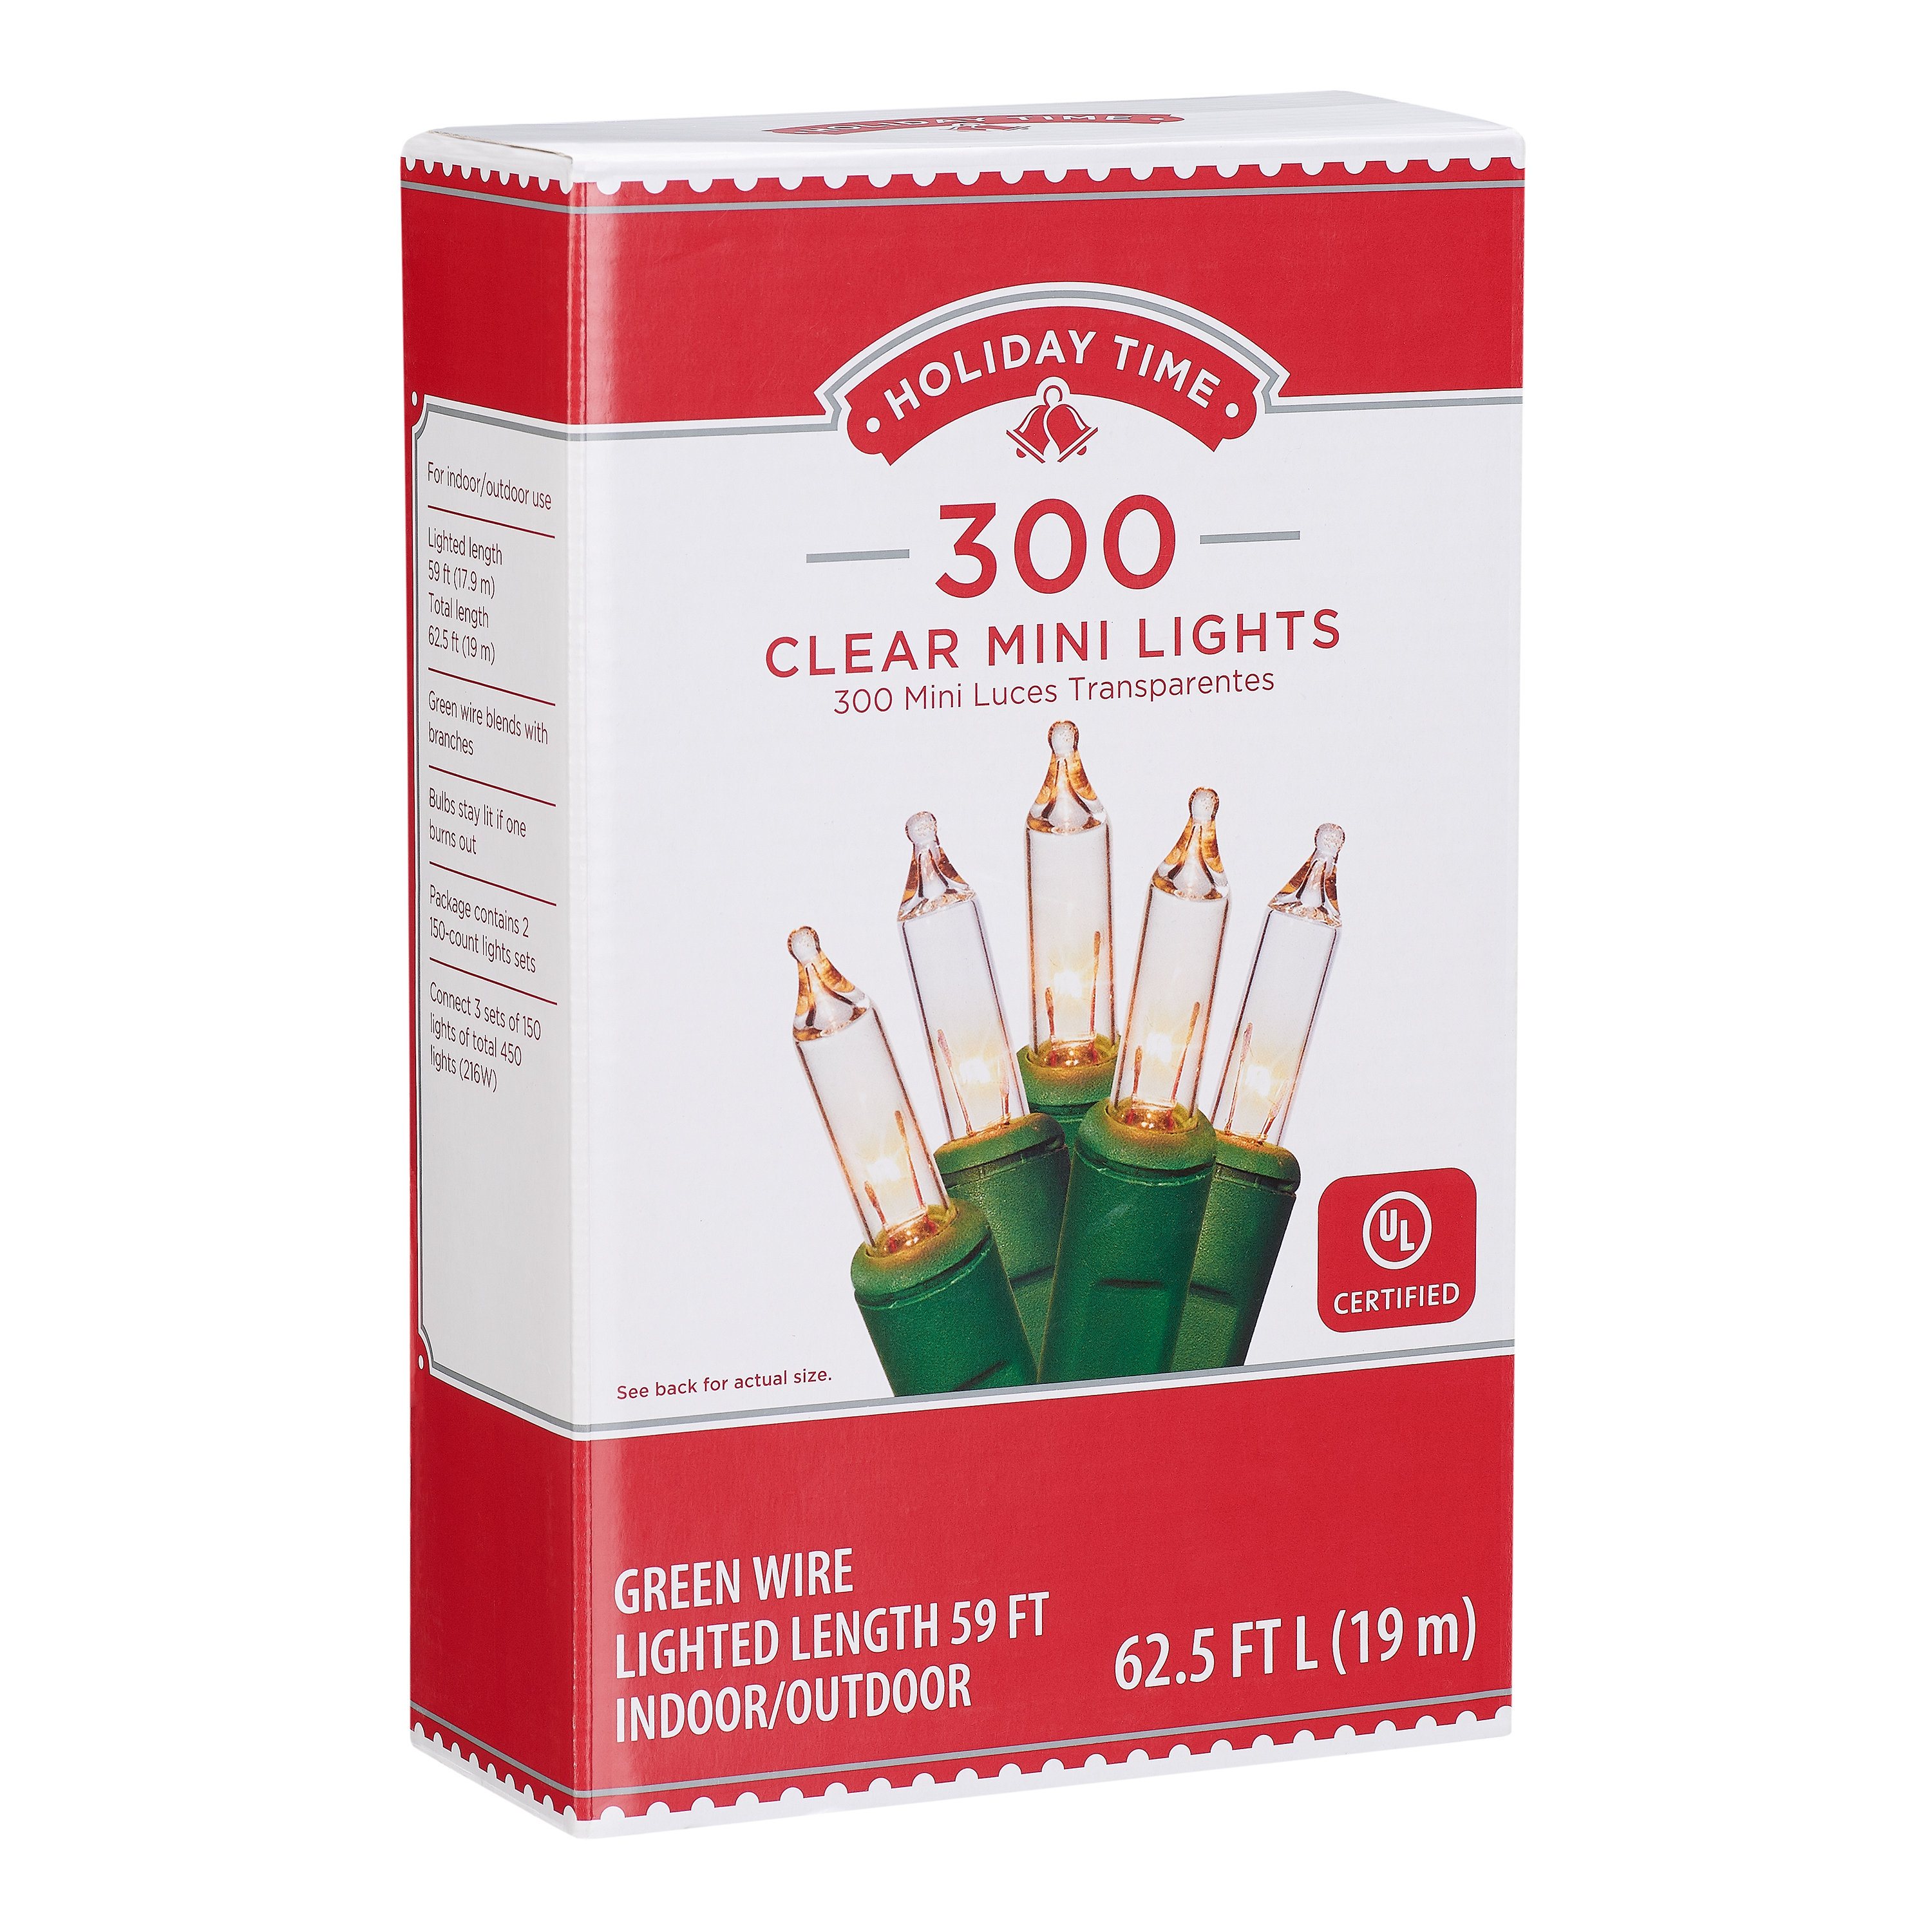 Holiday Time Indoor and Outdoor Clear Mini Christmas Lights, 59', 300 Count, Green Wire - image 2 of 4